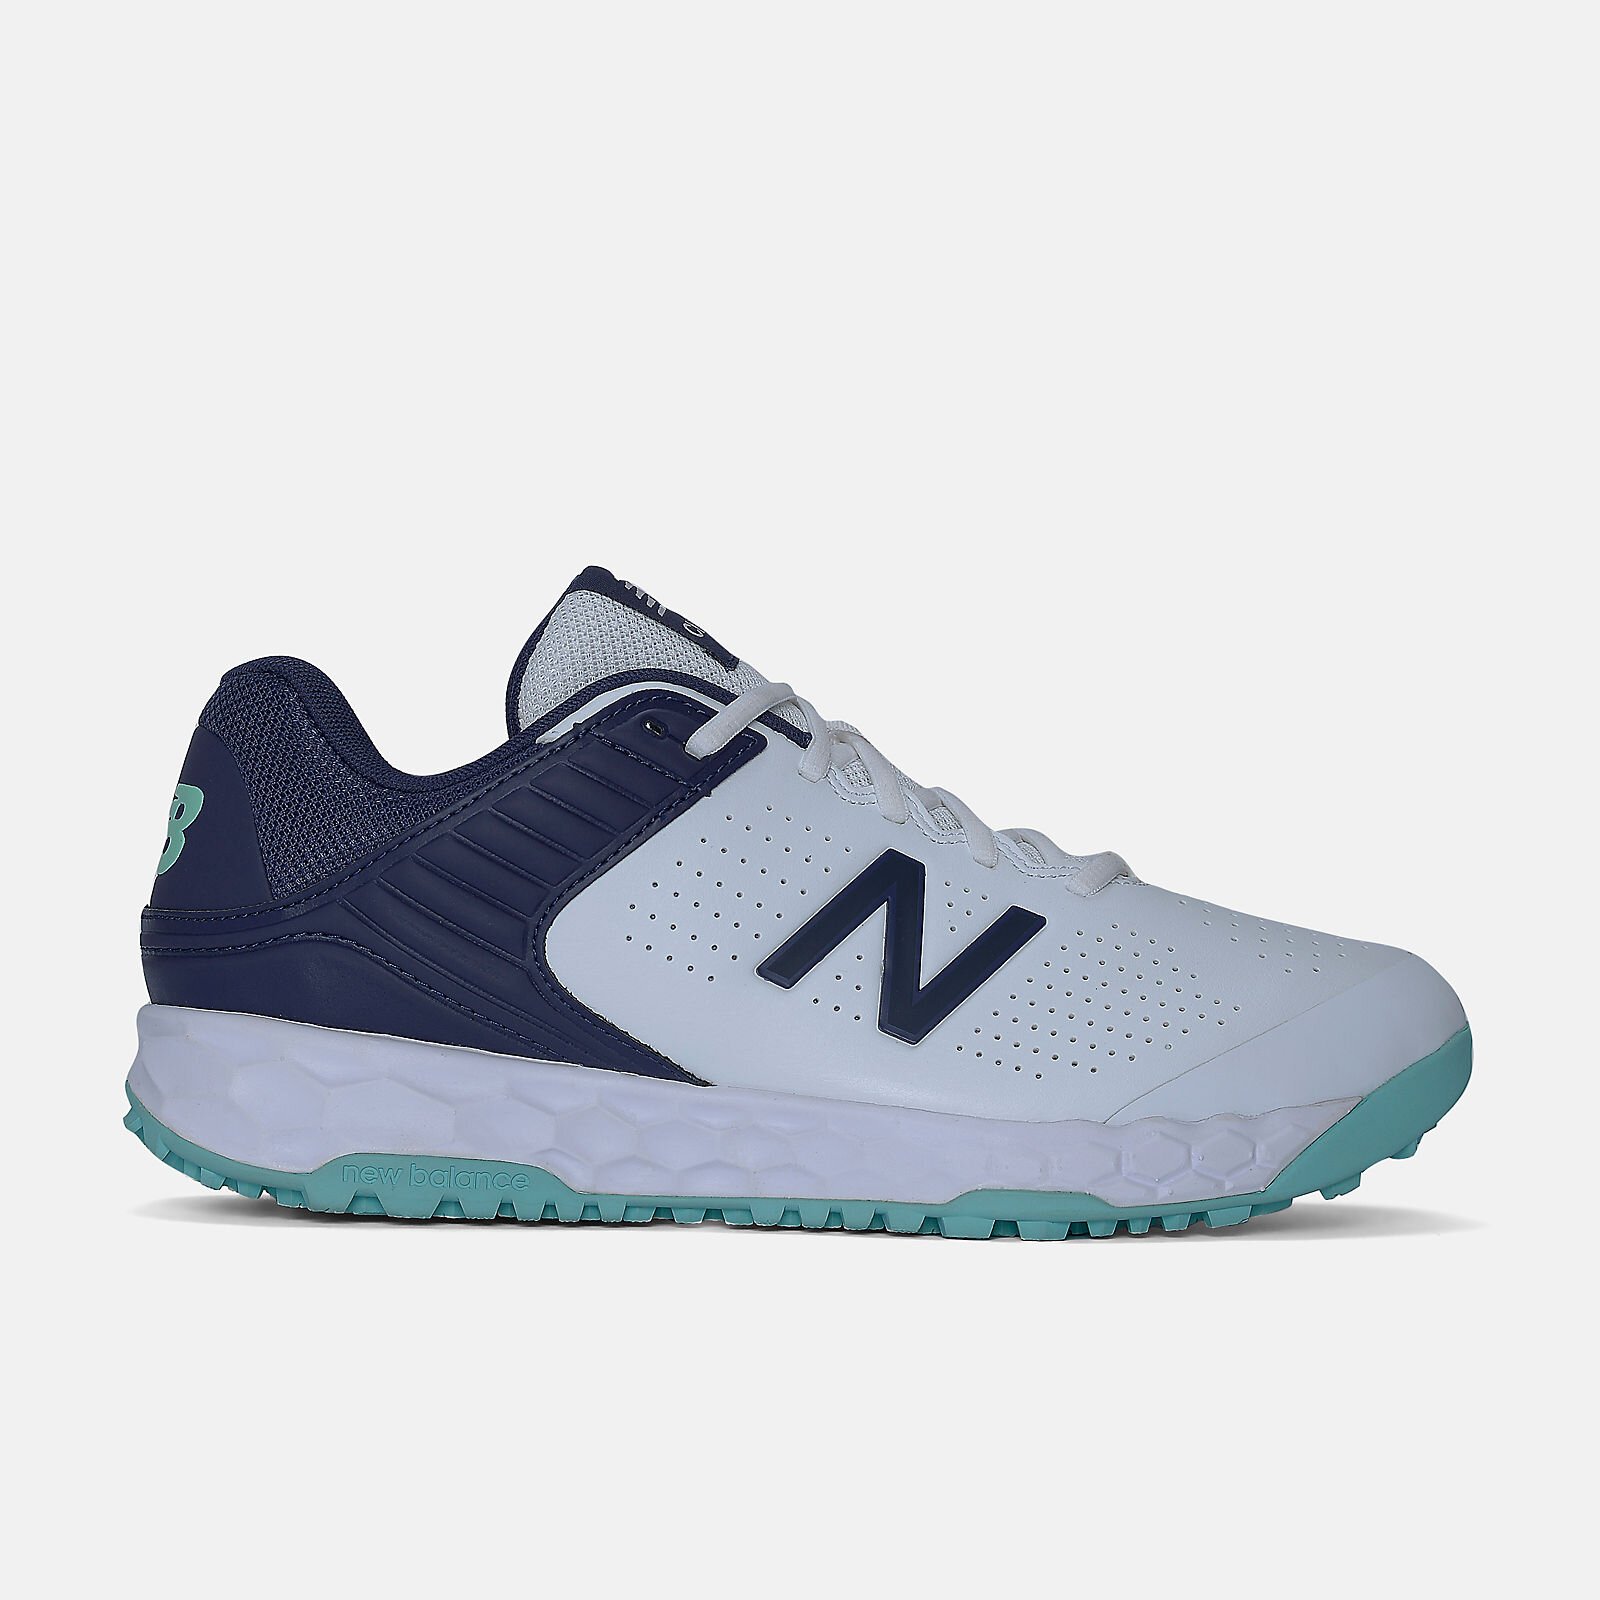 New Balance CK4020 2E Cricket Shoes - Buy Online - Ph: 1800-370-766 - AfterPay & ZipPay Available!